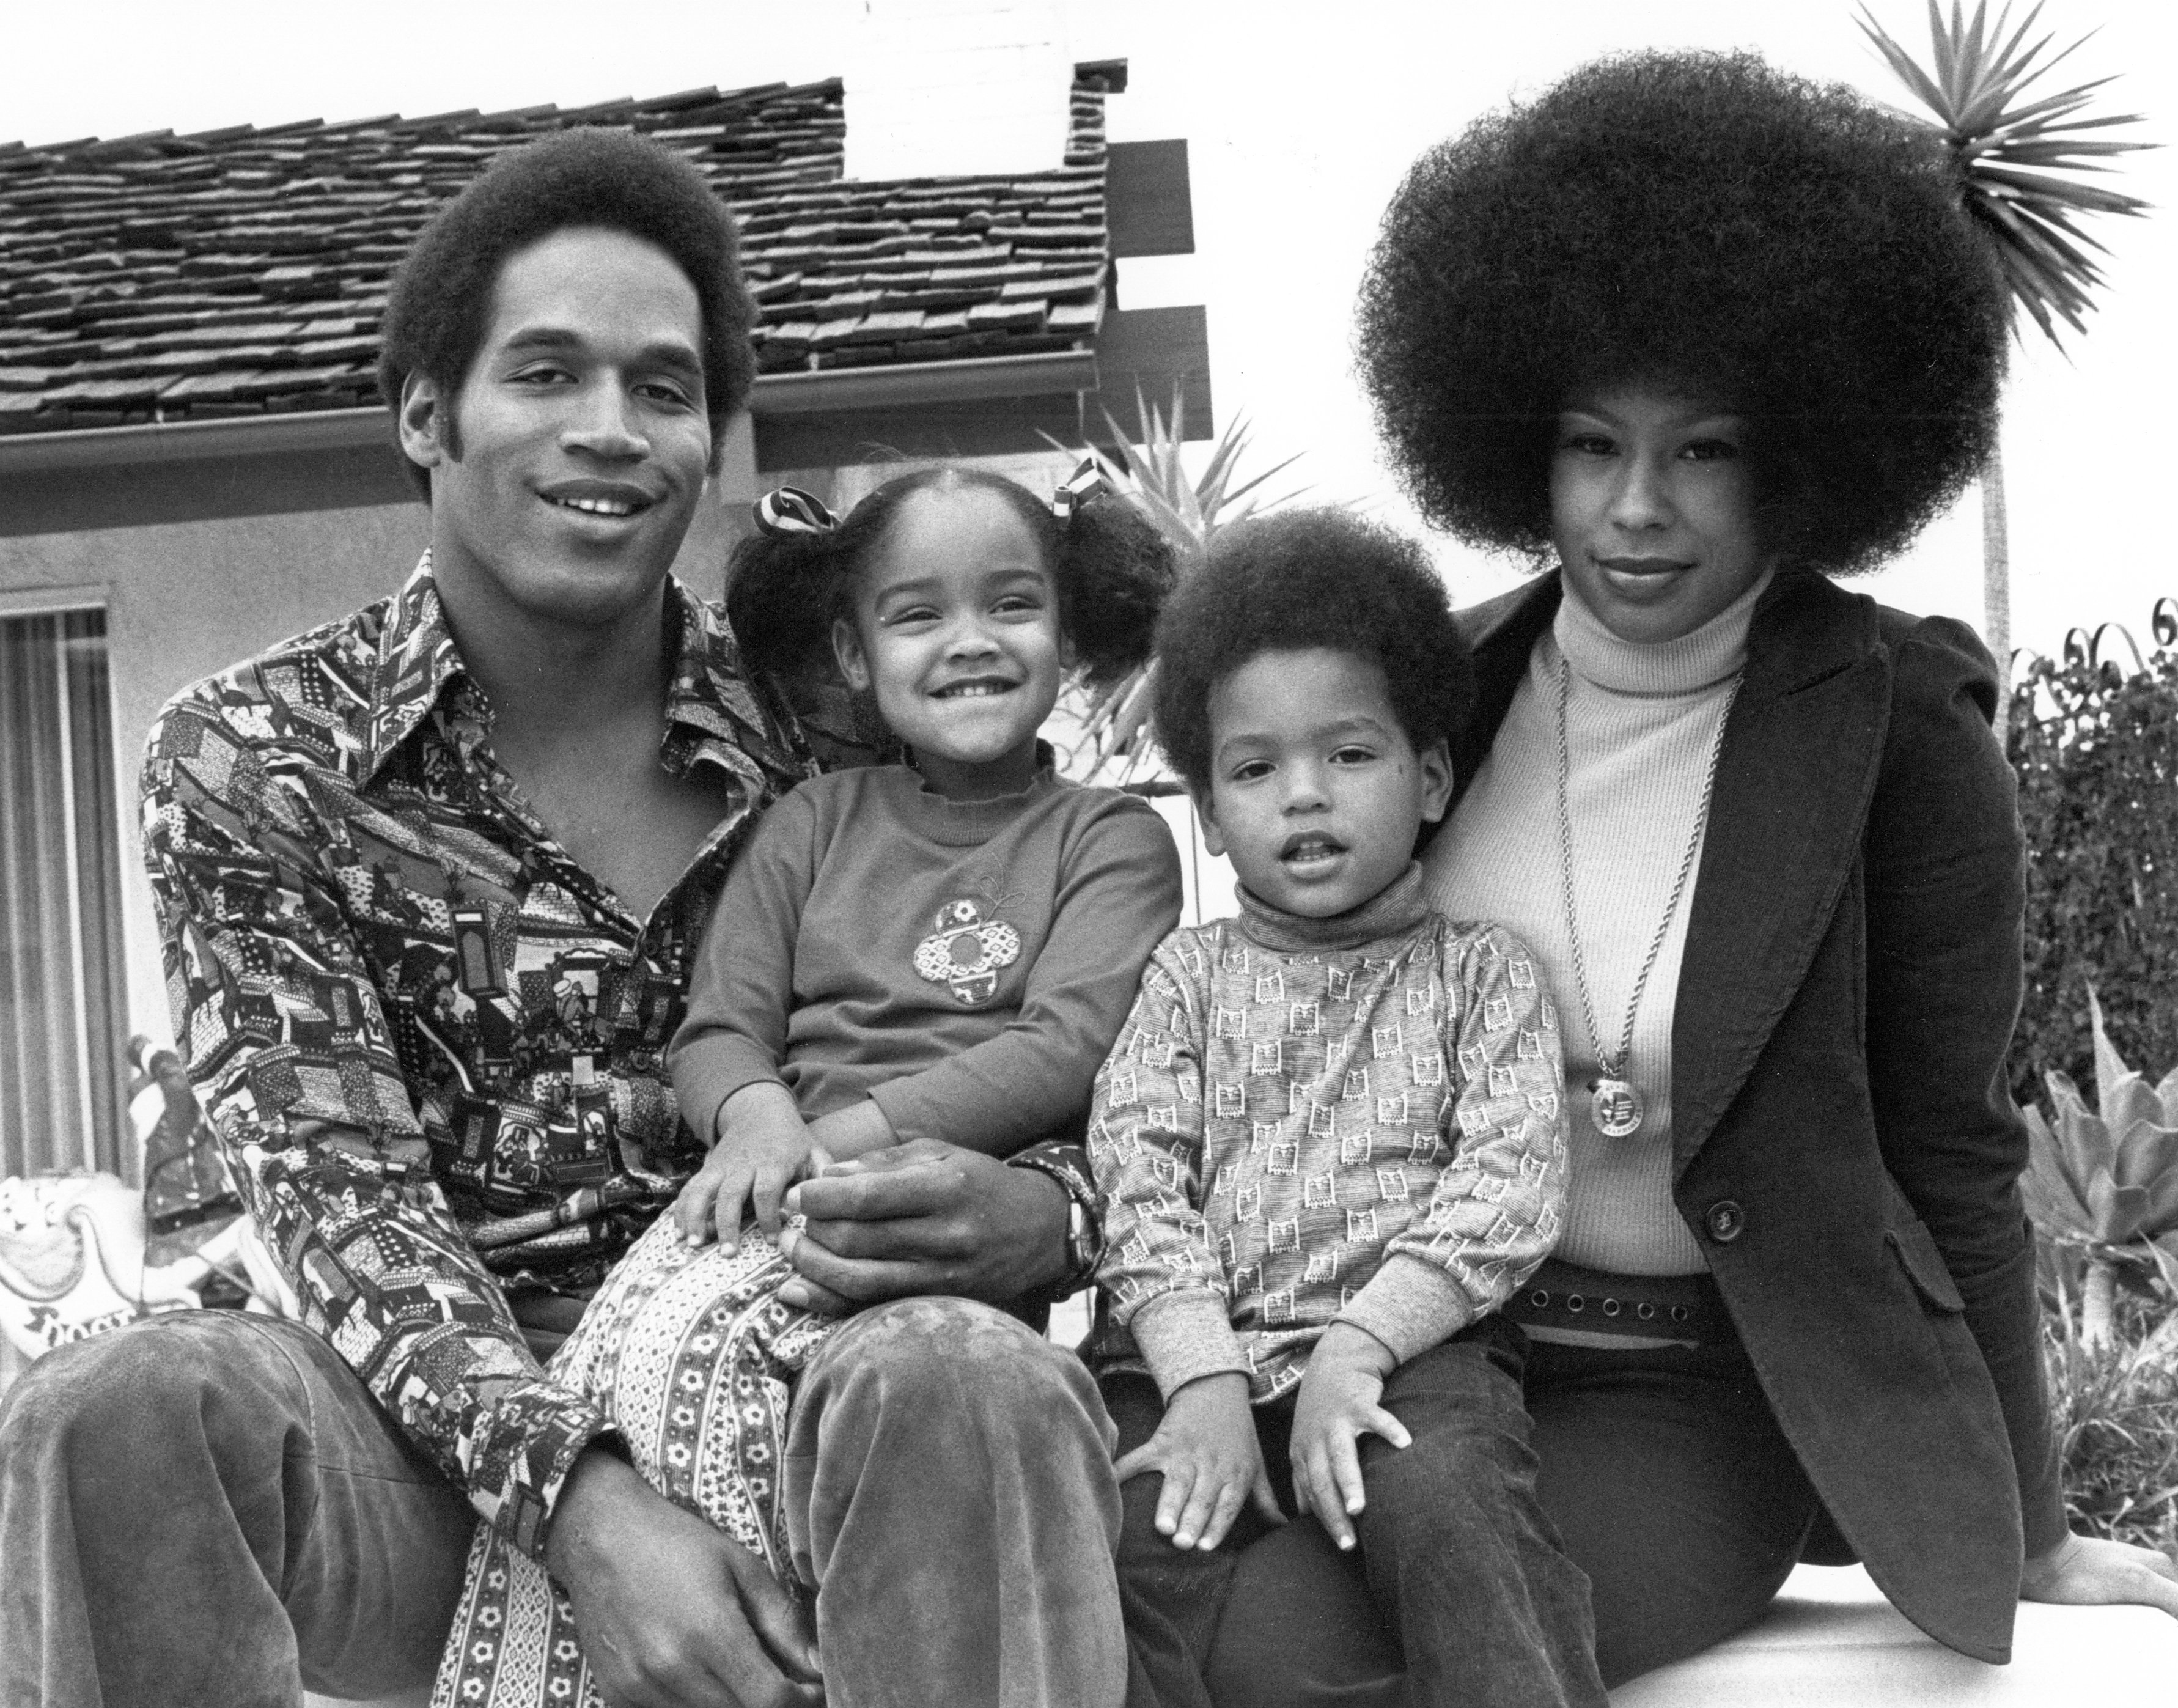 O.J. Simspson poses for a portrait with his ex-wife Marguerite Whitley and their children Arnelle and Jason on January 8, 1973, in Los Angeles | Source: Getty Images